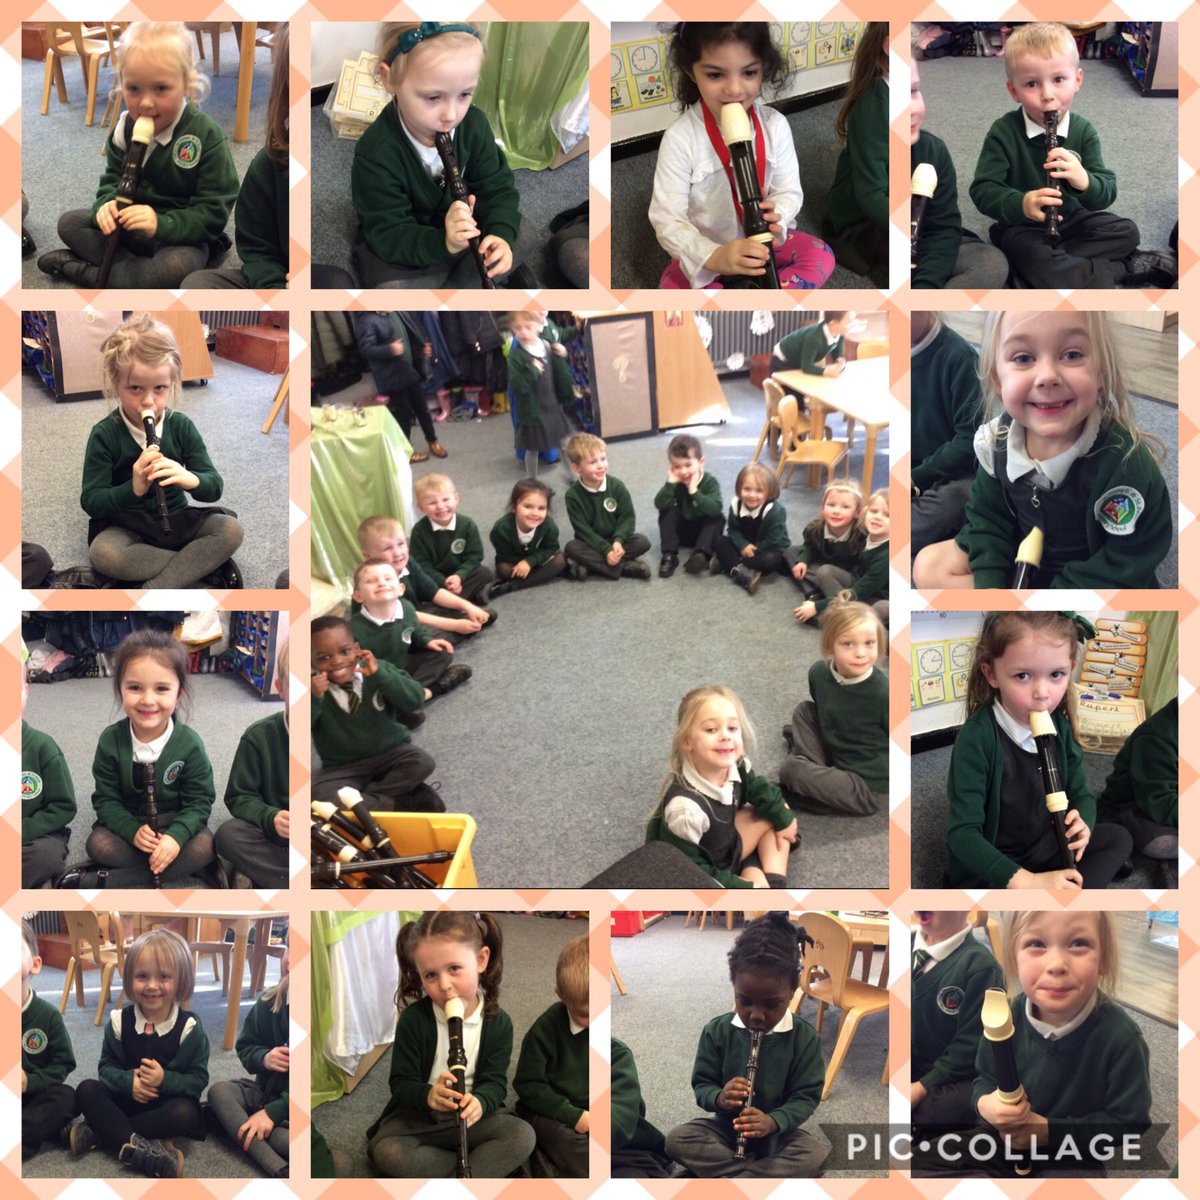 Reception have been applying new skills today. We learnt how to play tennis and how to play the recorder. We had so much fun! @StJosephStBede #FindYourBrave #ChildrensMentalHealthAwarenessWeek #SJSBPE #SJSBMusic #EYFS